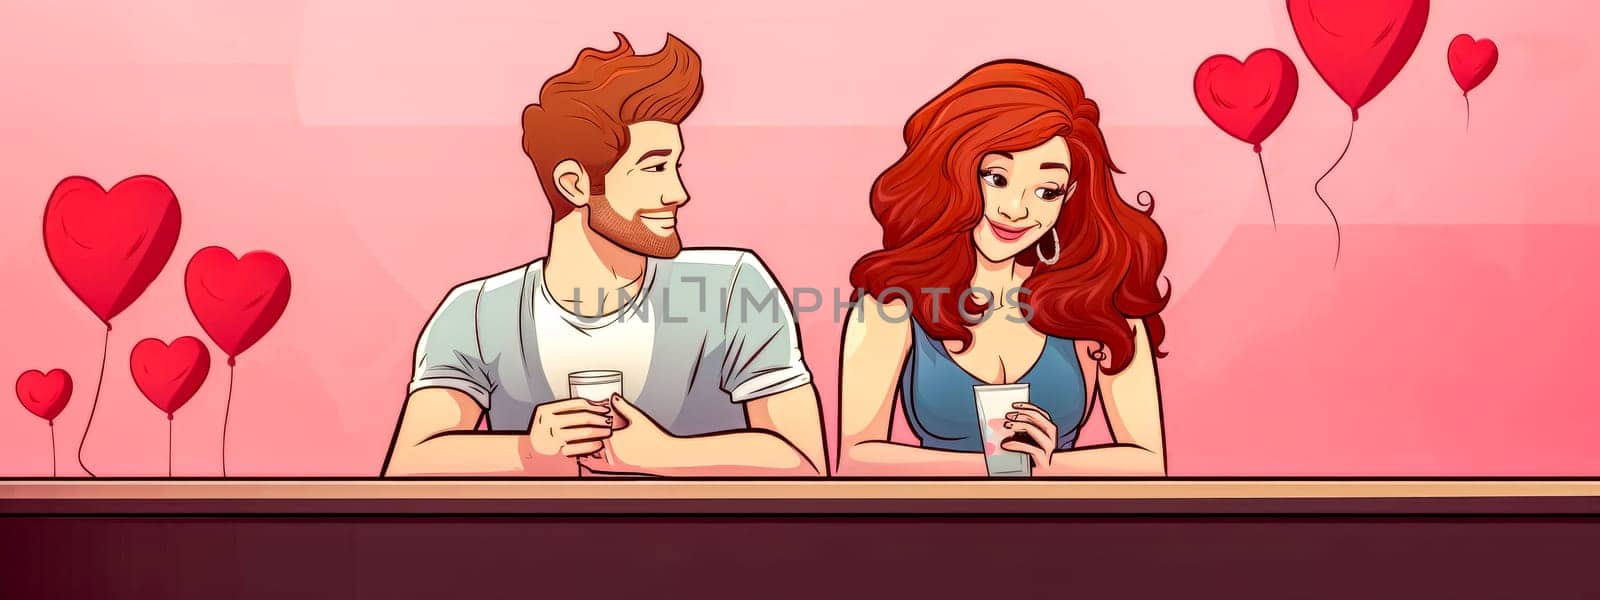 Love at the cafe: cartoon couple sharing a moment by Edophoto